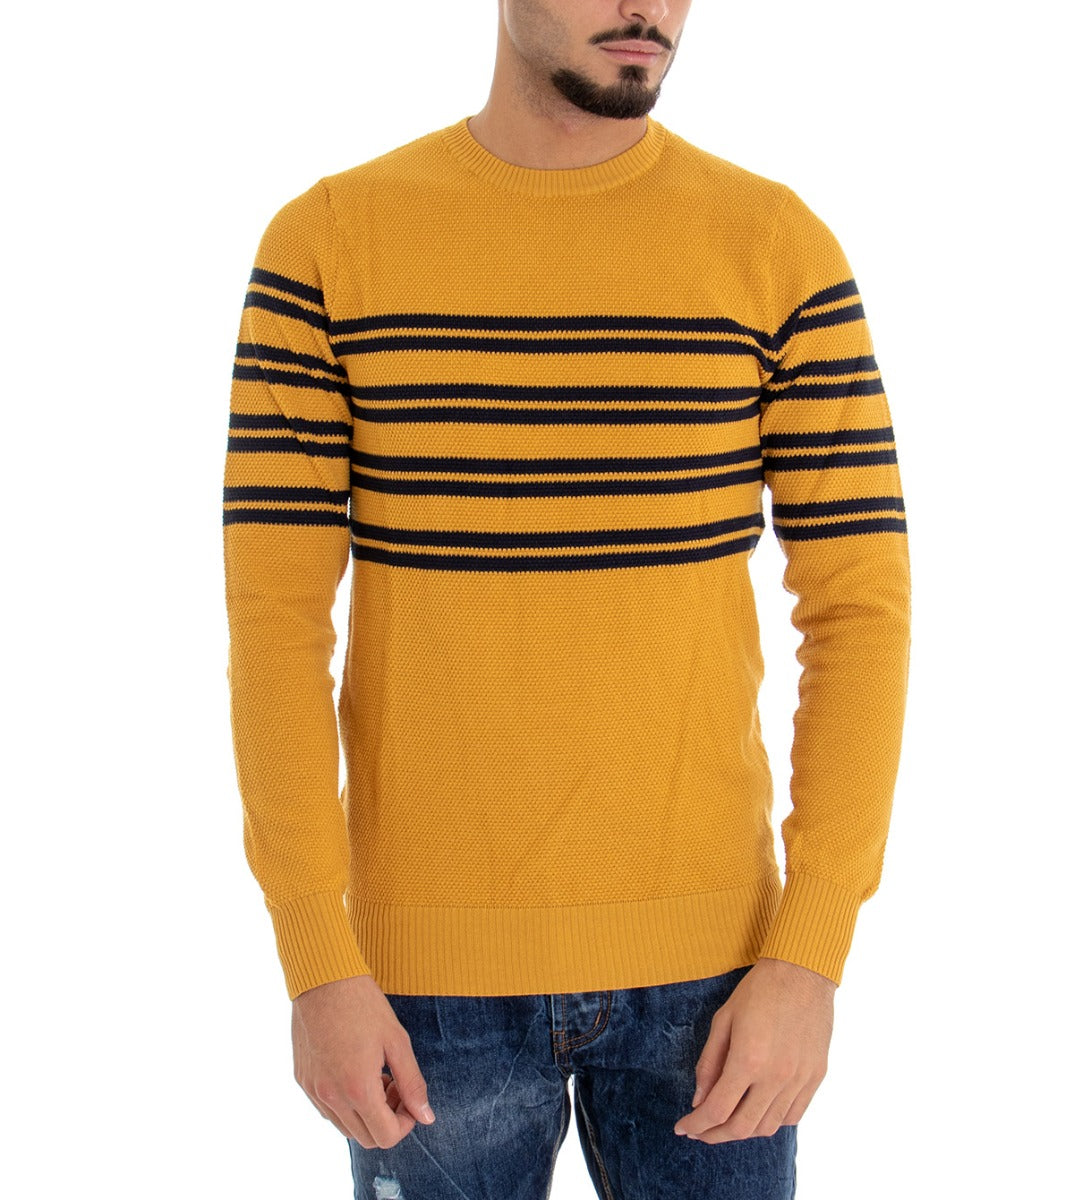 Men's Crew Neck Sweater Mustard Striped Sweater Long Sleeves Knitted Texture GIOSAL